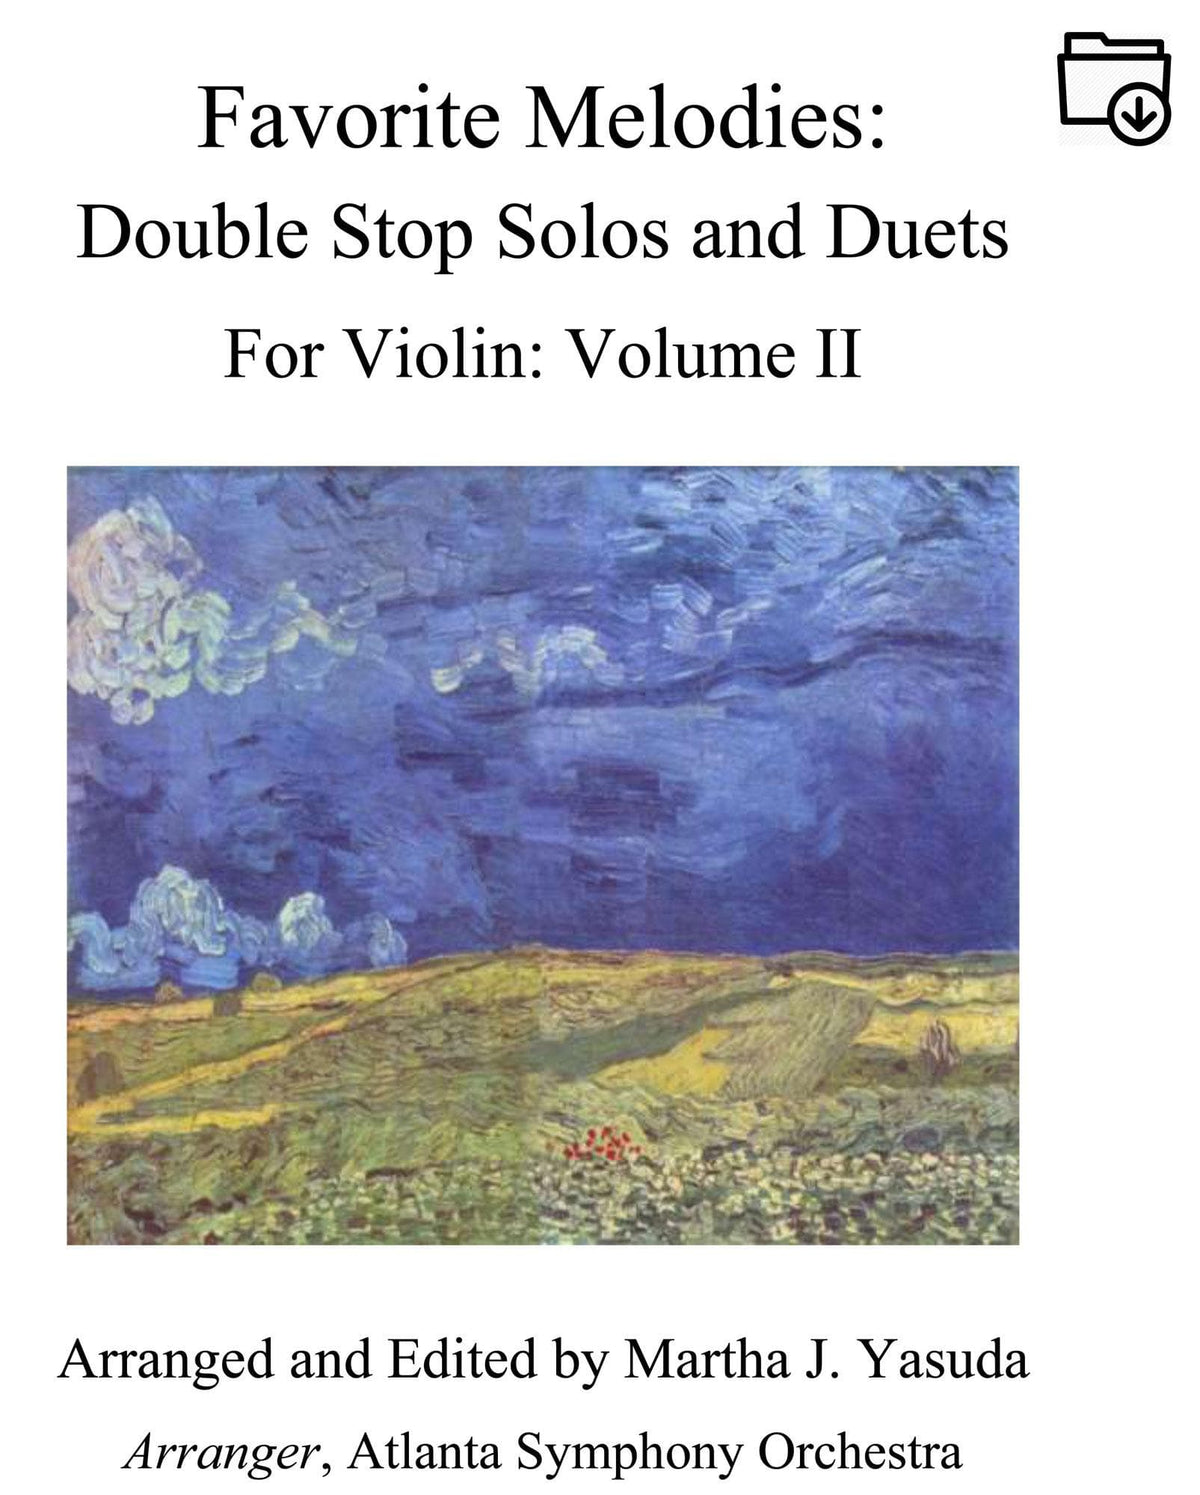 Yasuda, Martha - Favorite Melodies: Double Stop Solos and Duets for Violin, Volume II - Digital Download